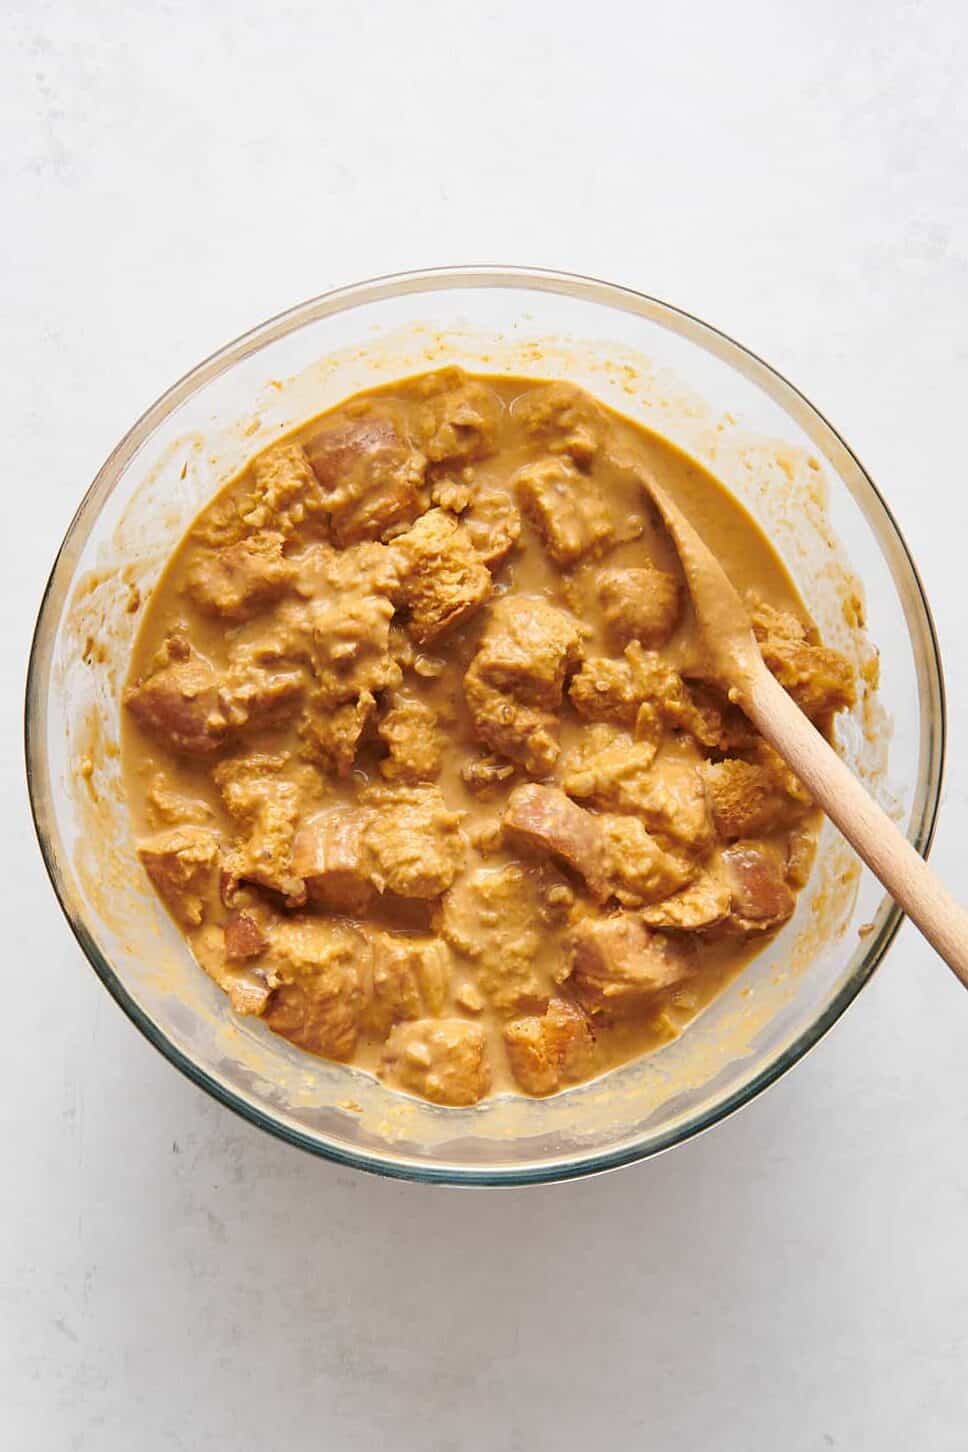 pumpkin bread pudding mixture sitting in a large glass bowl with a wooden spoon